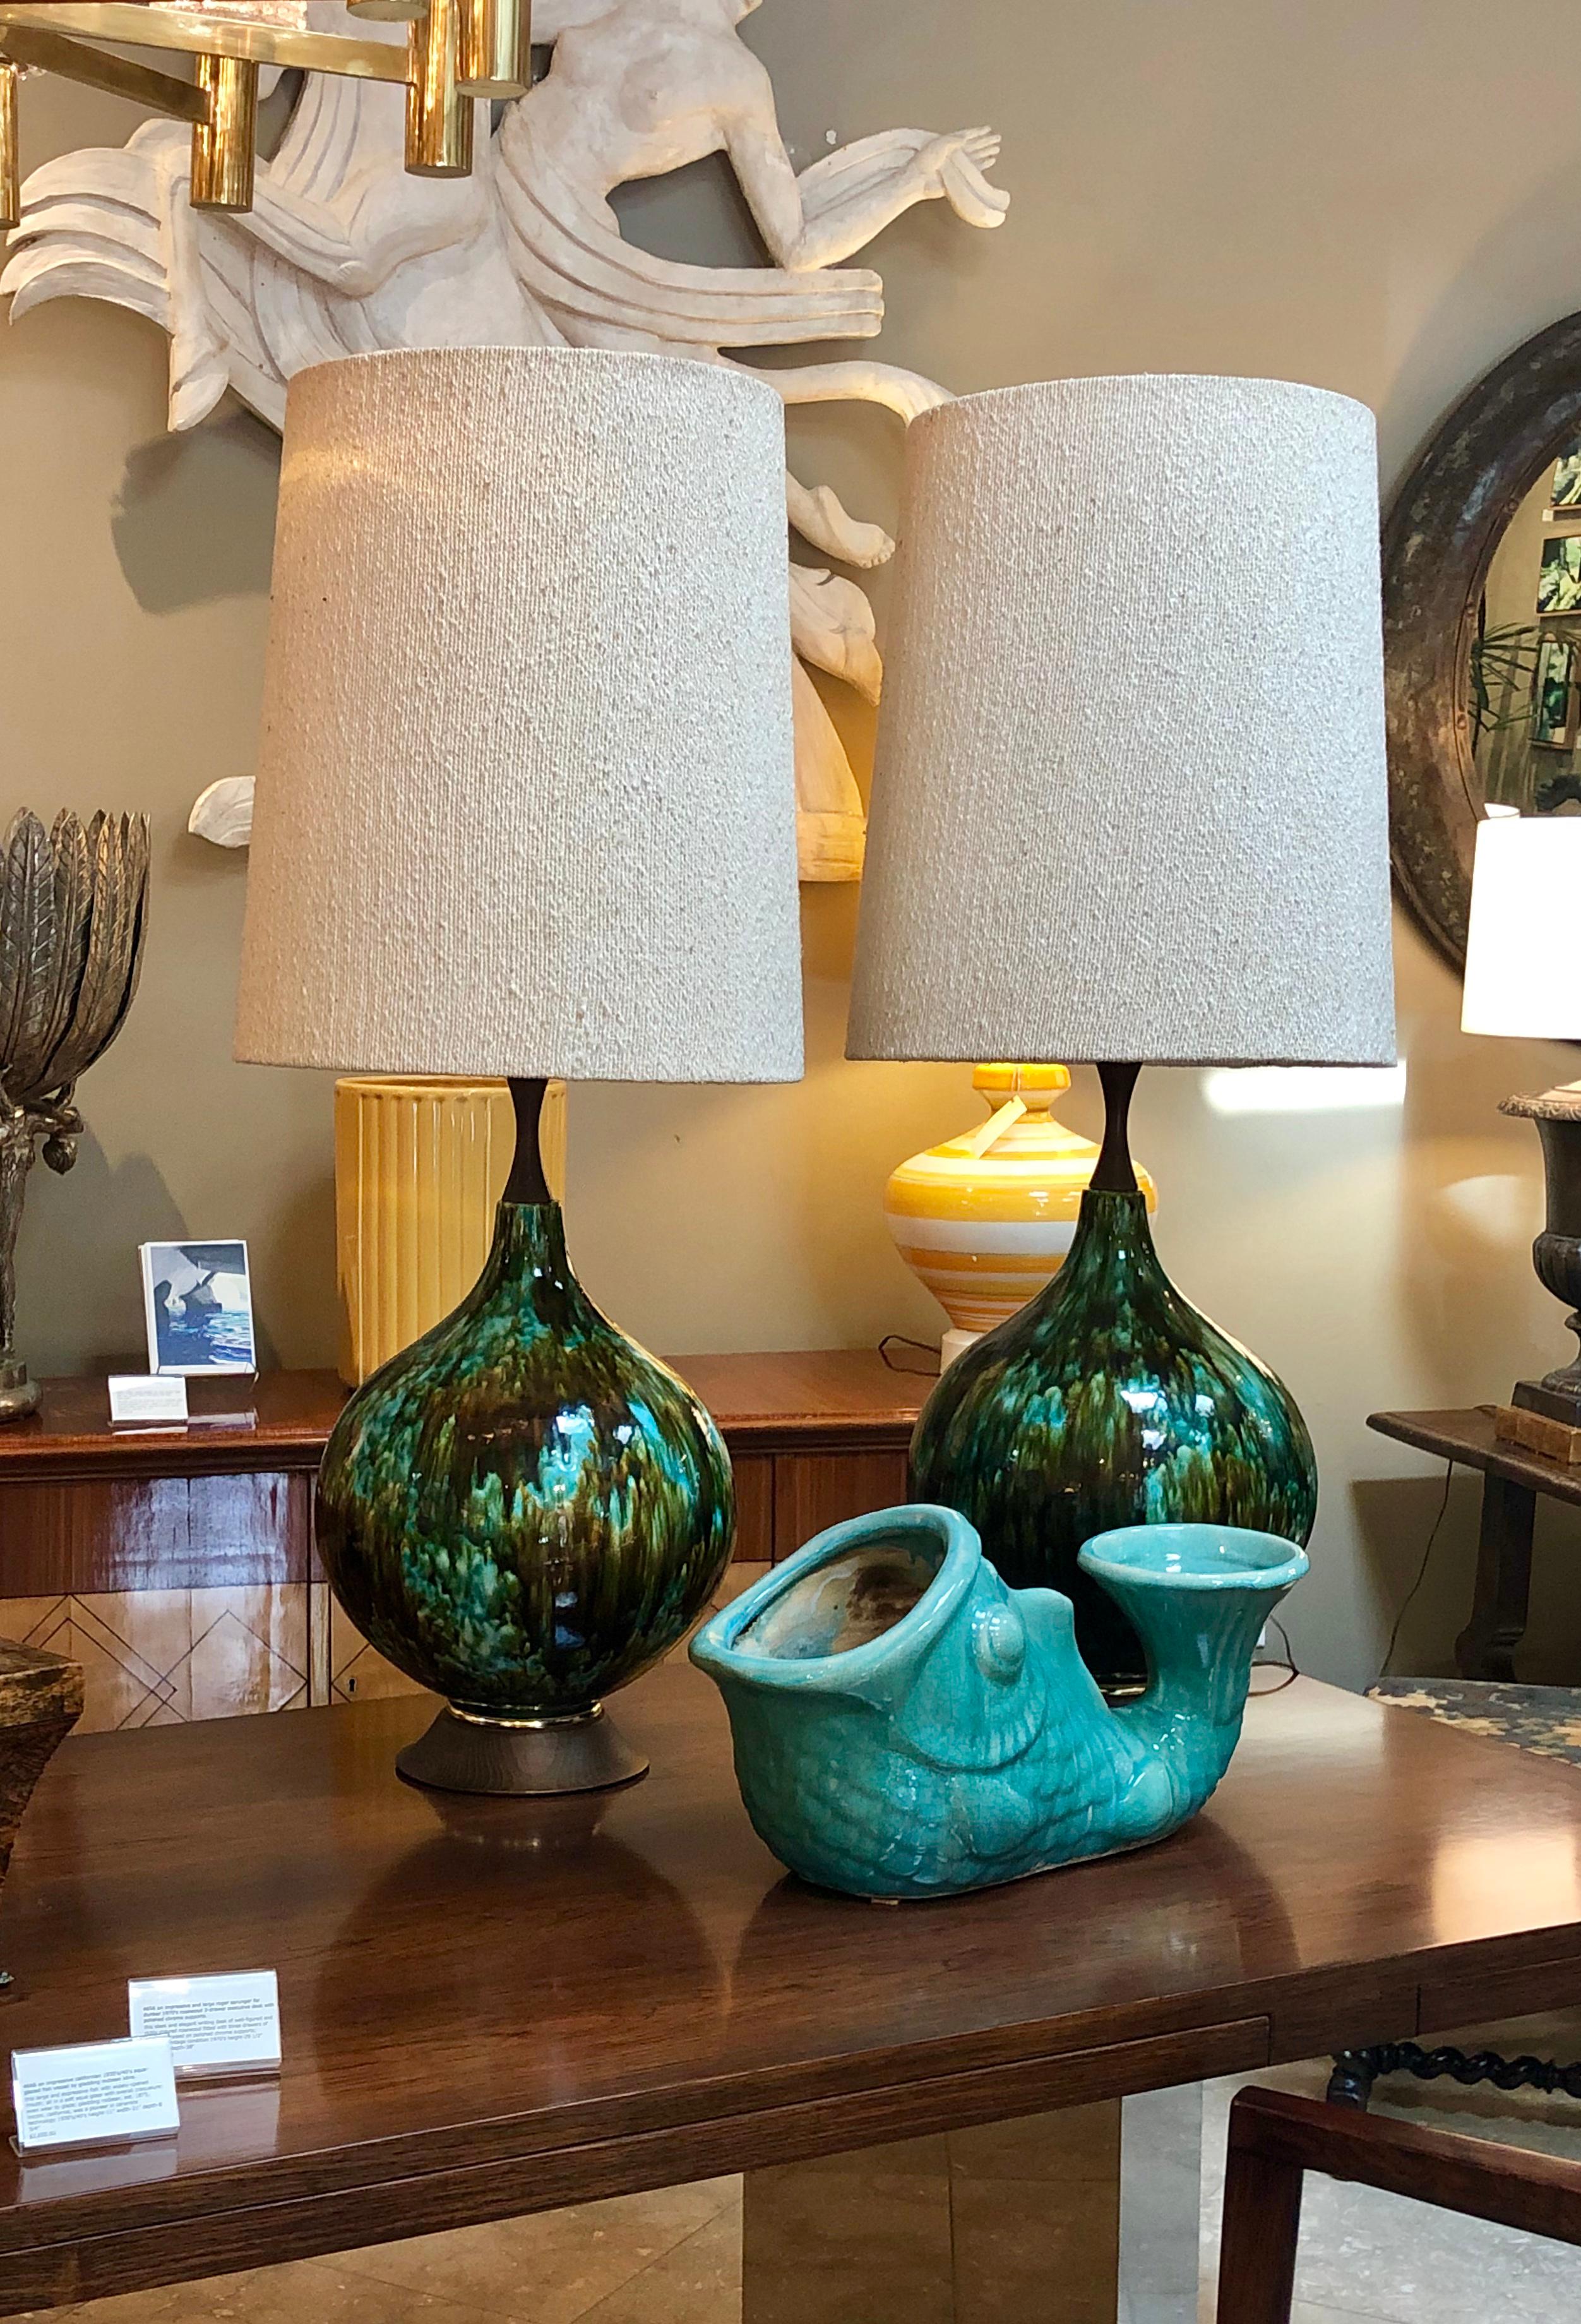 1960s glam at its best, each of large bulbous form covered in a rich olive green and teal drip-glaze, resting on a splayed wooden base with brass perimeter band.